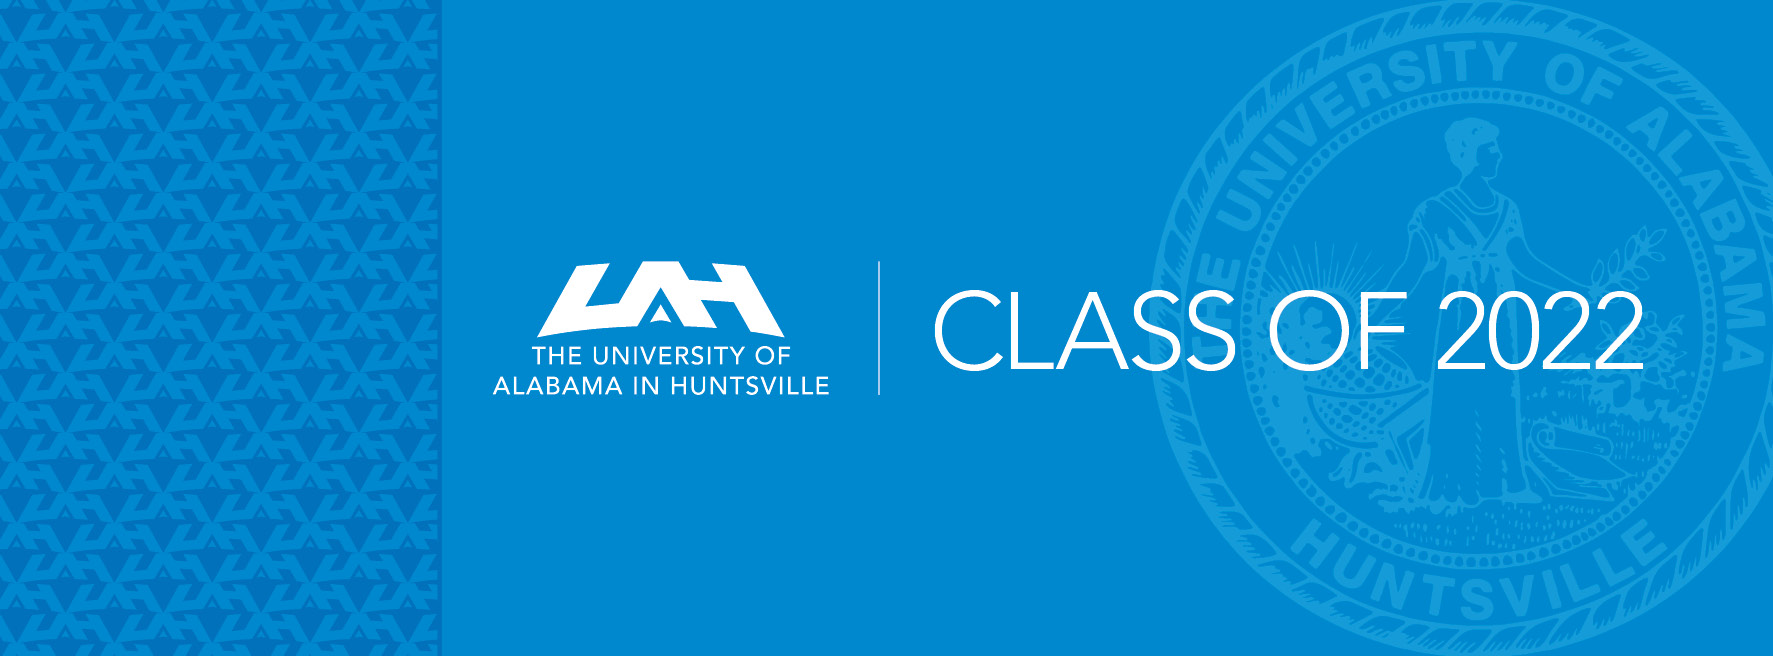 UAH seal on a blue background with text that reads class of 2021